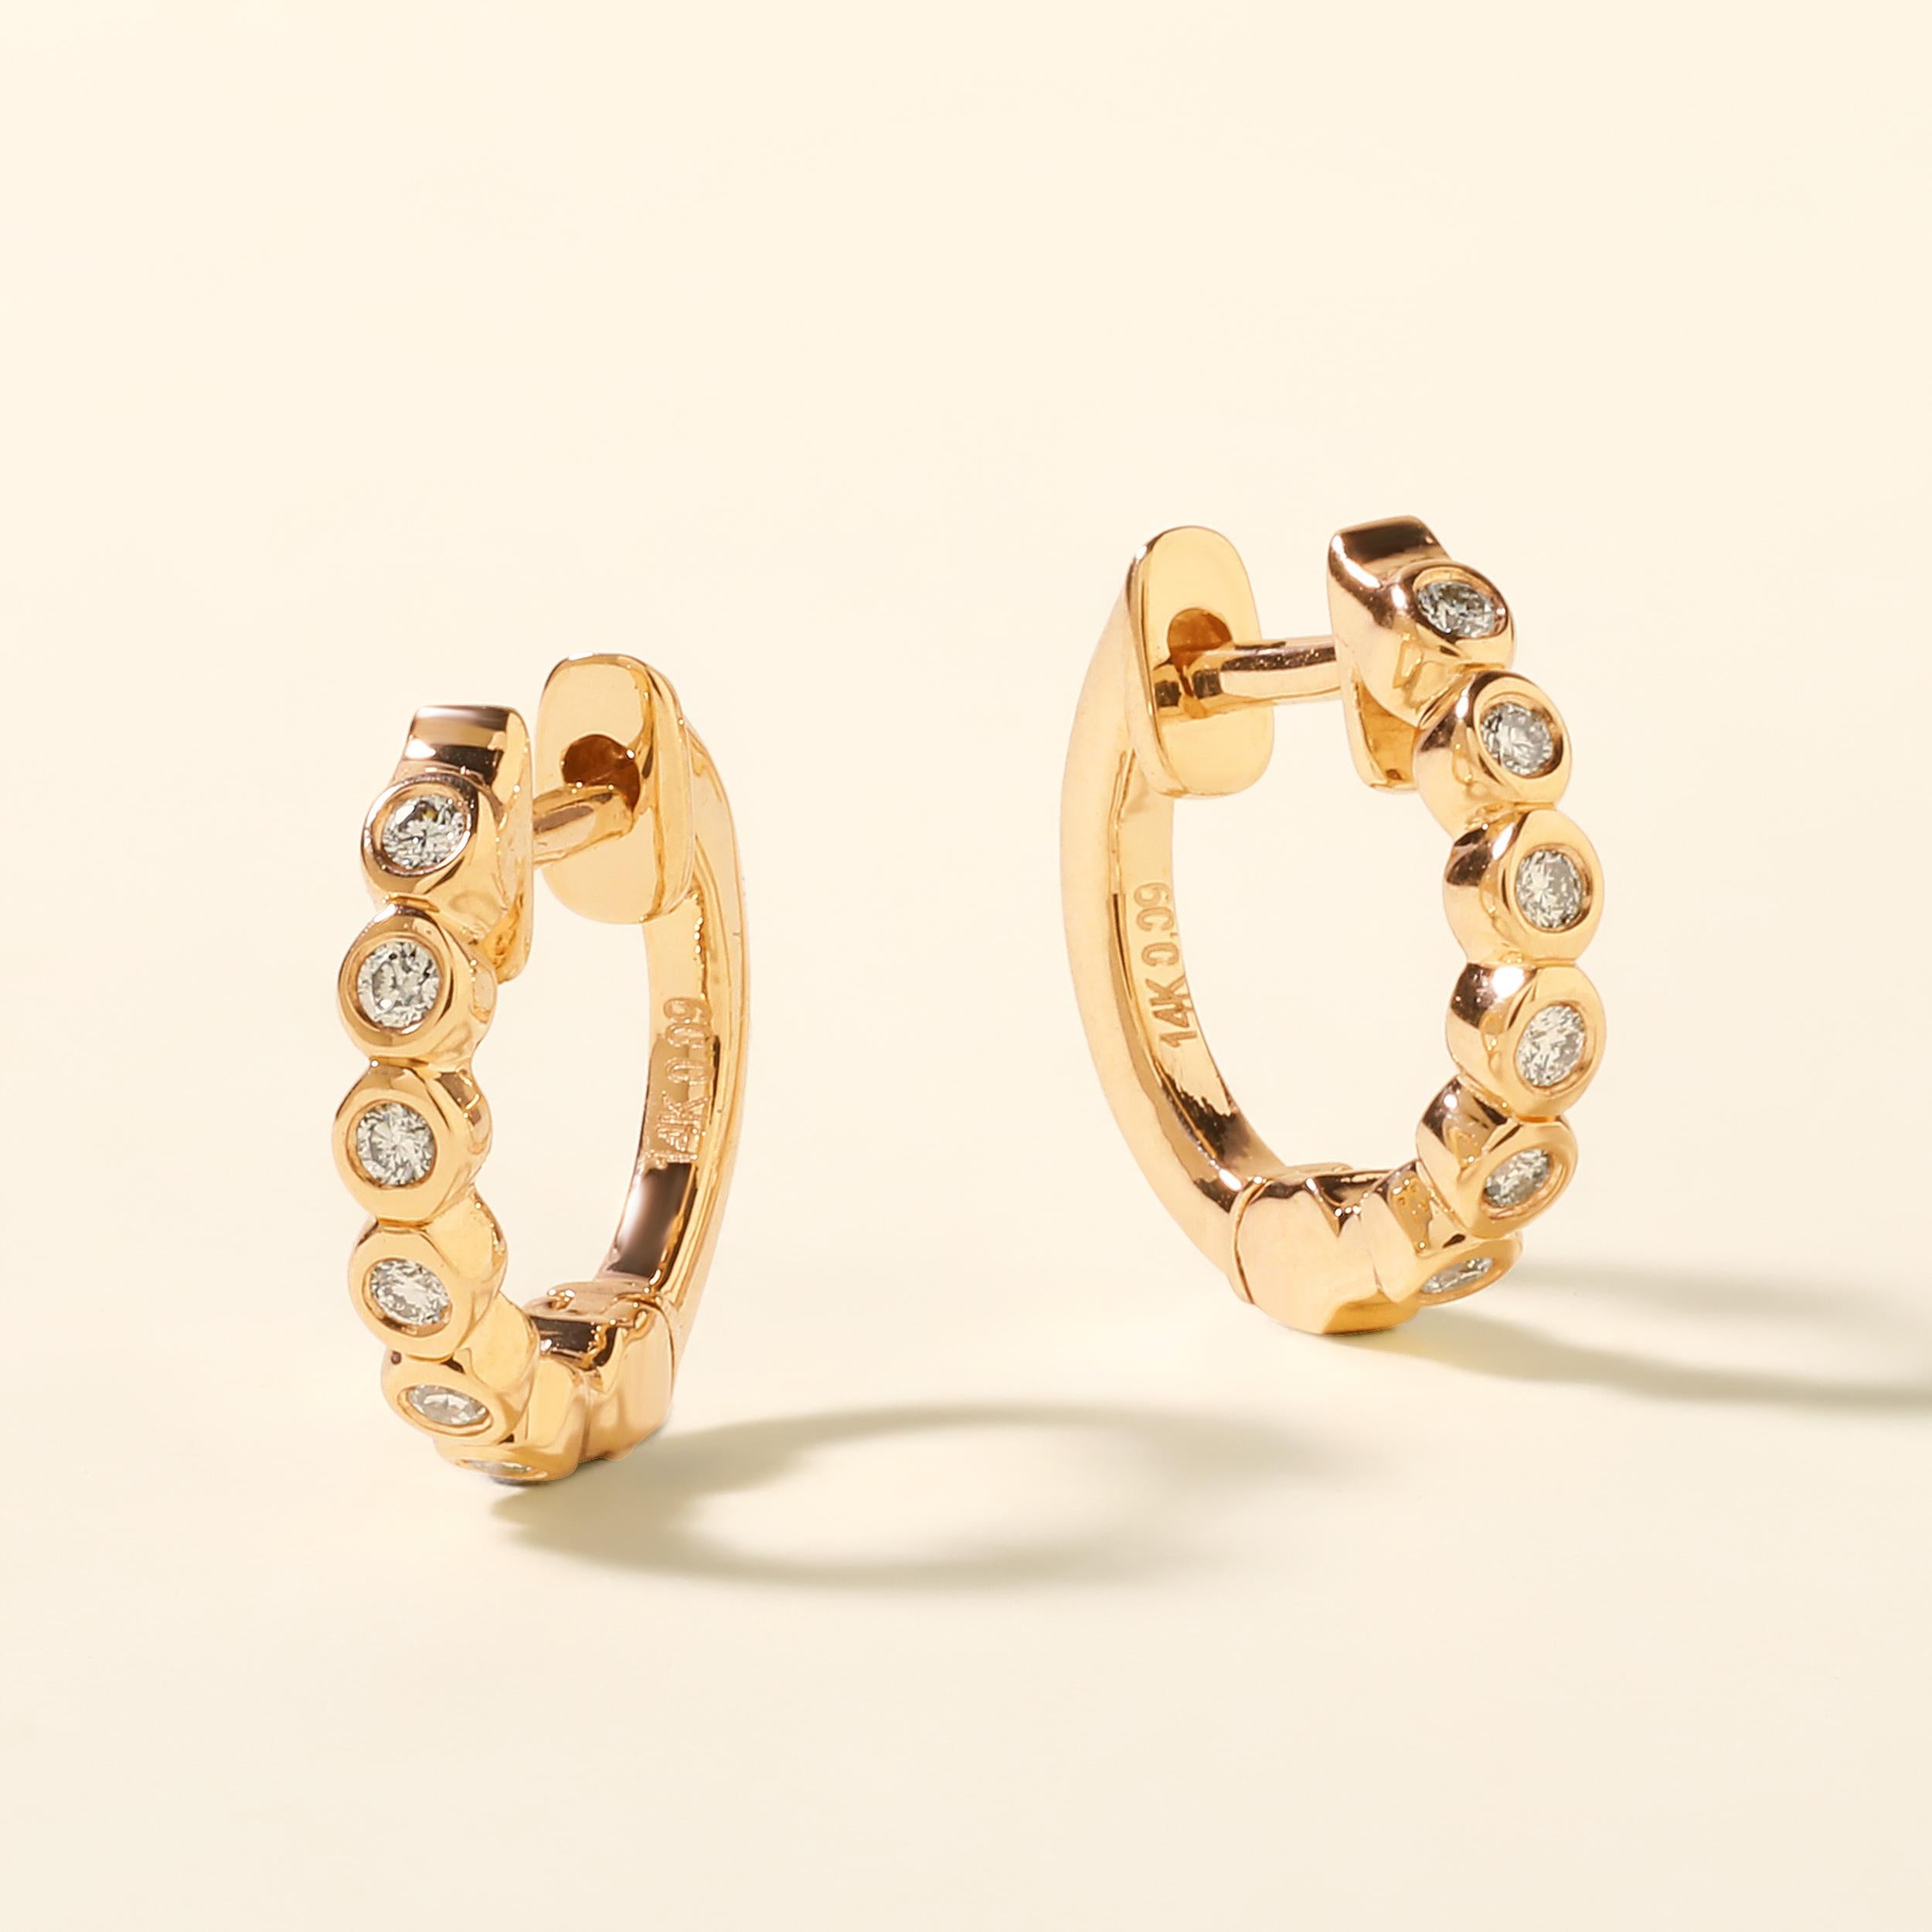 Crafted in 1.68 grams of 14K Yellow Gold, the earrings contains 12 stones of Round Diamonds with a total of 0.09 carat in G-H color and SI clarity.
This jewelry piece will be expertly crafted by our skilled artisans upon order. Allow us a shipping